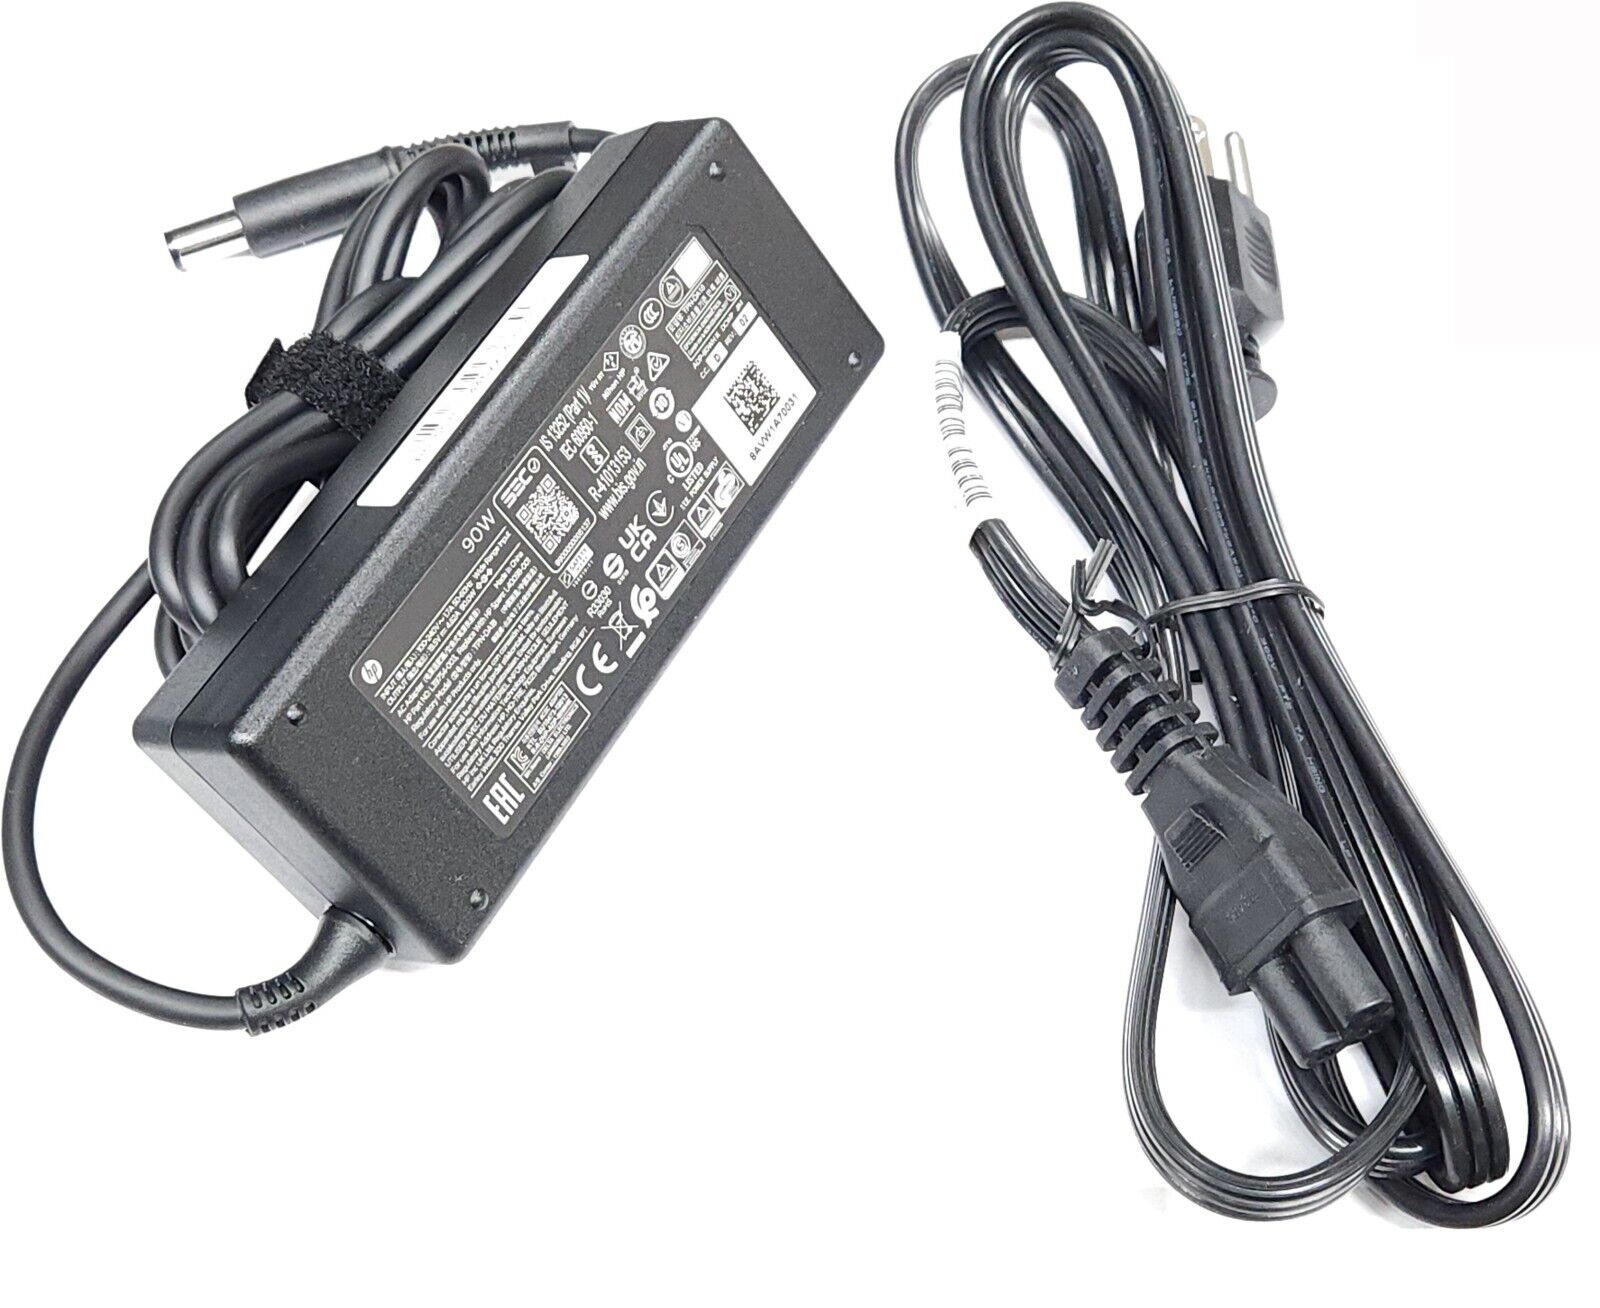 New Genuine 90w Charger AC Power Adapter Supply for HP EliteDesk 800 G5 G6